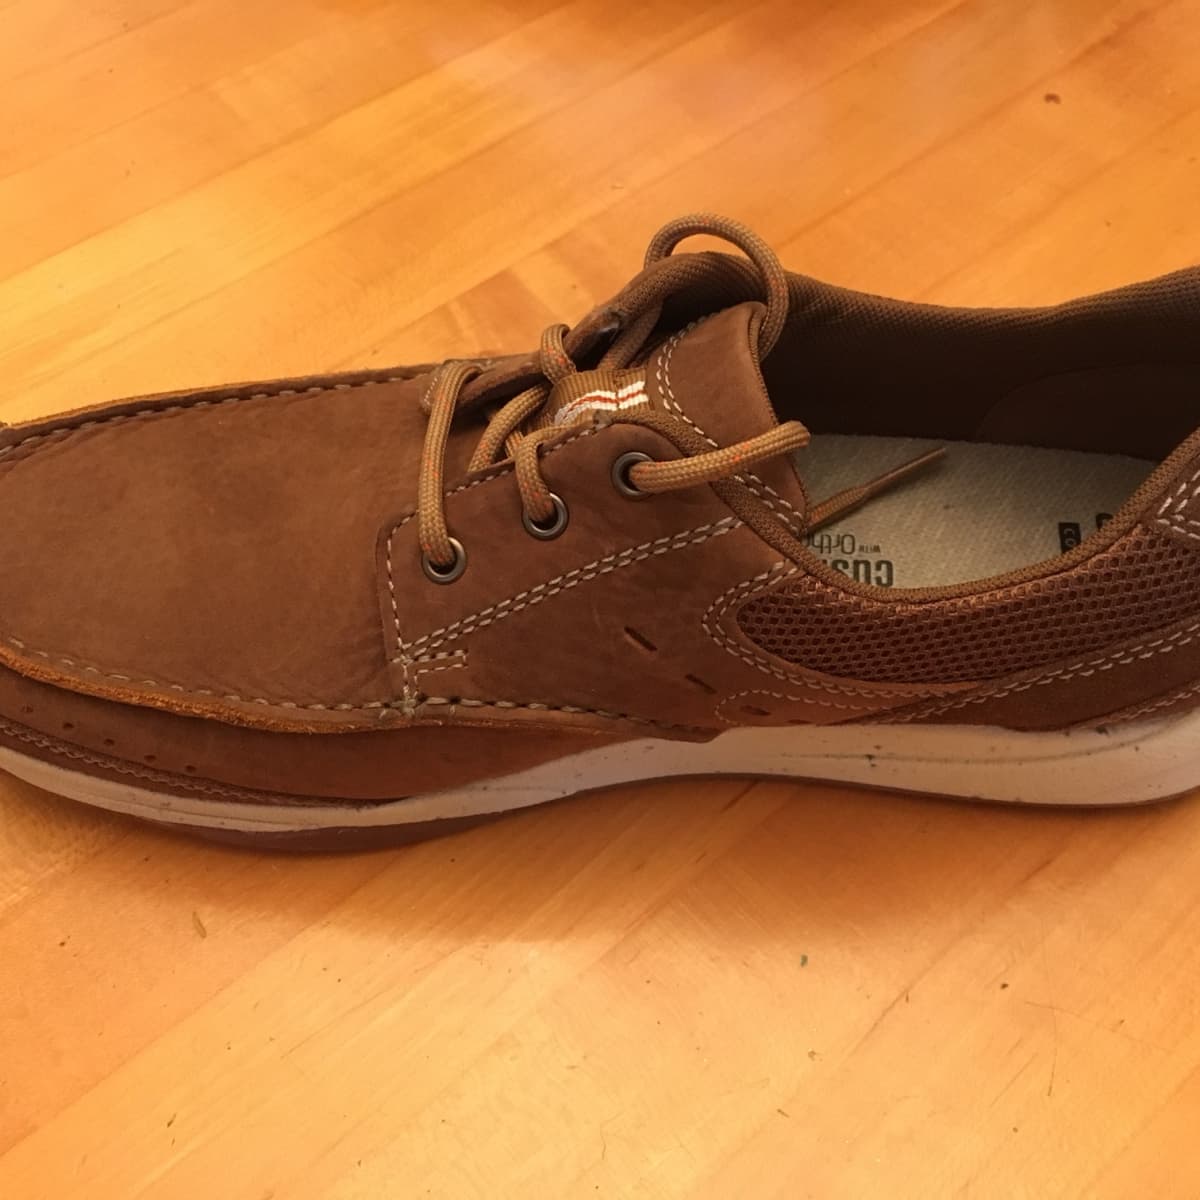 My Review of Clarks Shoes: The Comfortable Footwear - Bellatory